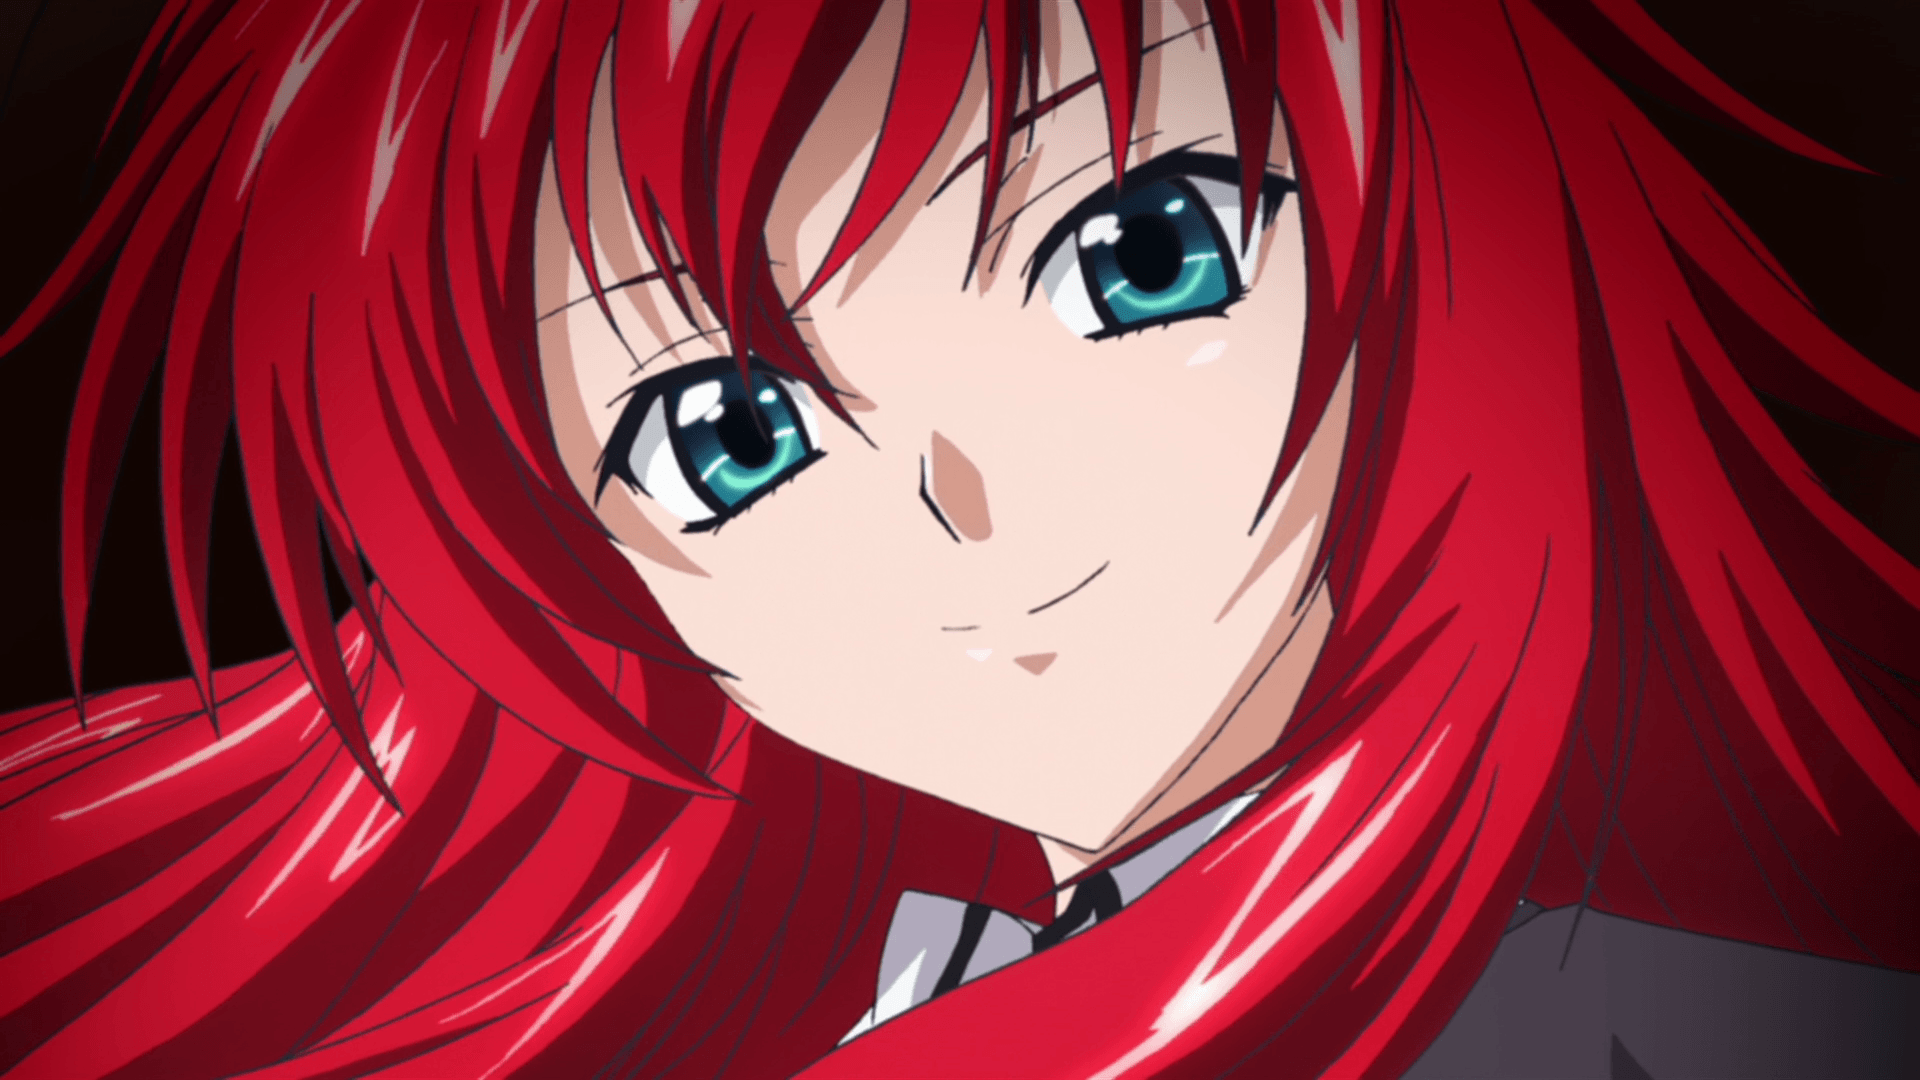 Rias Gremory Highschool DxD 10 HD Wallpapers Fo Wallpapers.